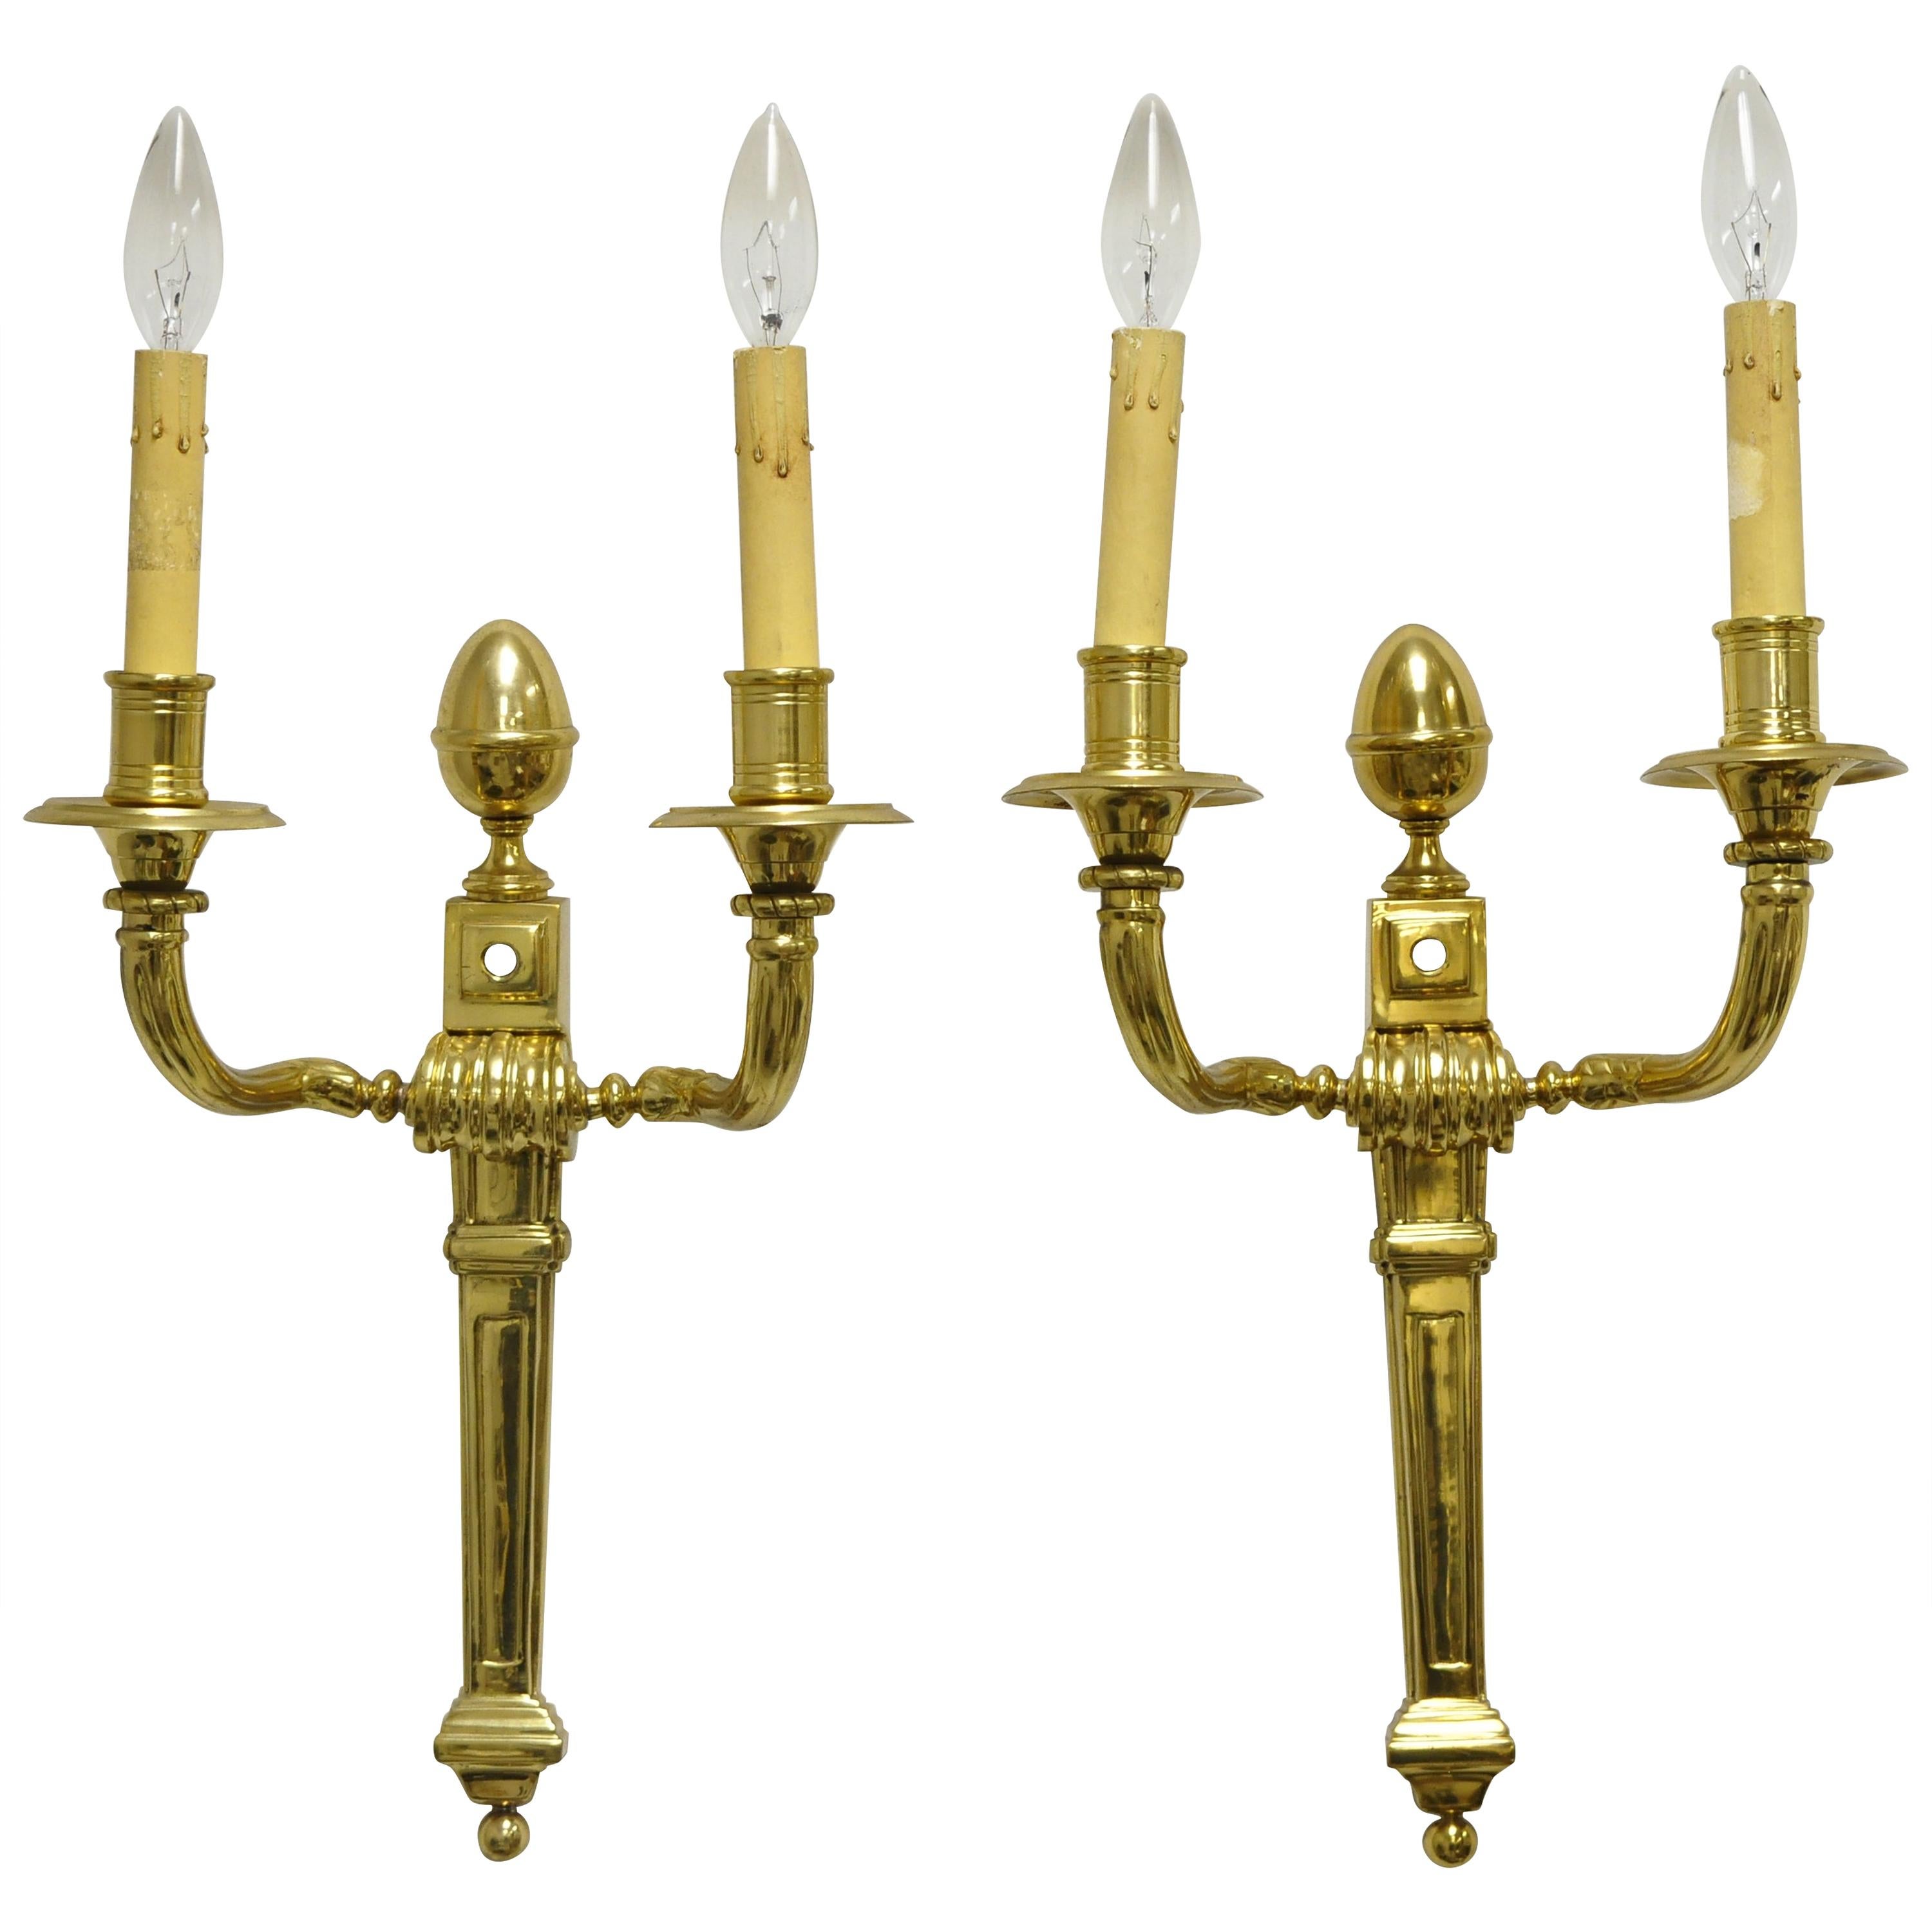 Vintage Solid Brass American Colonial Williamsburg Lighted Wall Sconces, Pair A